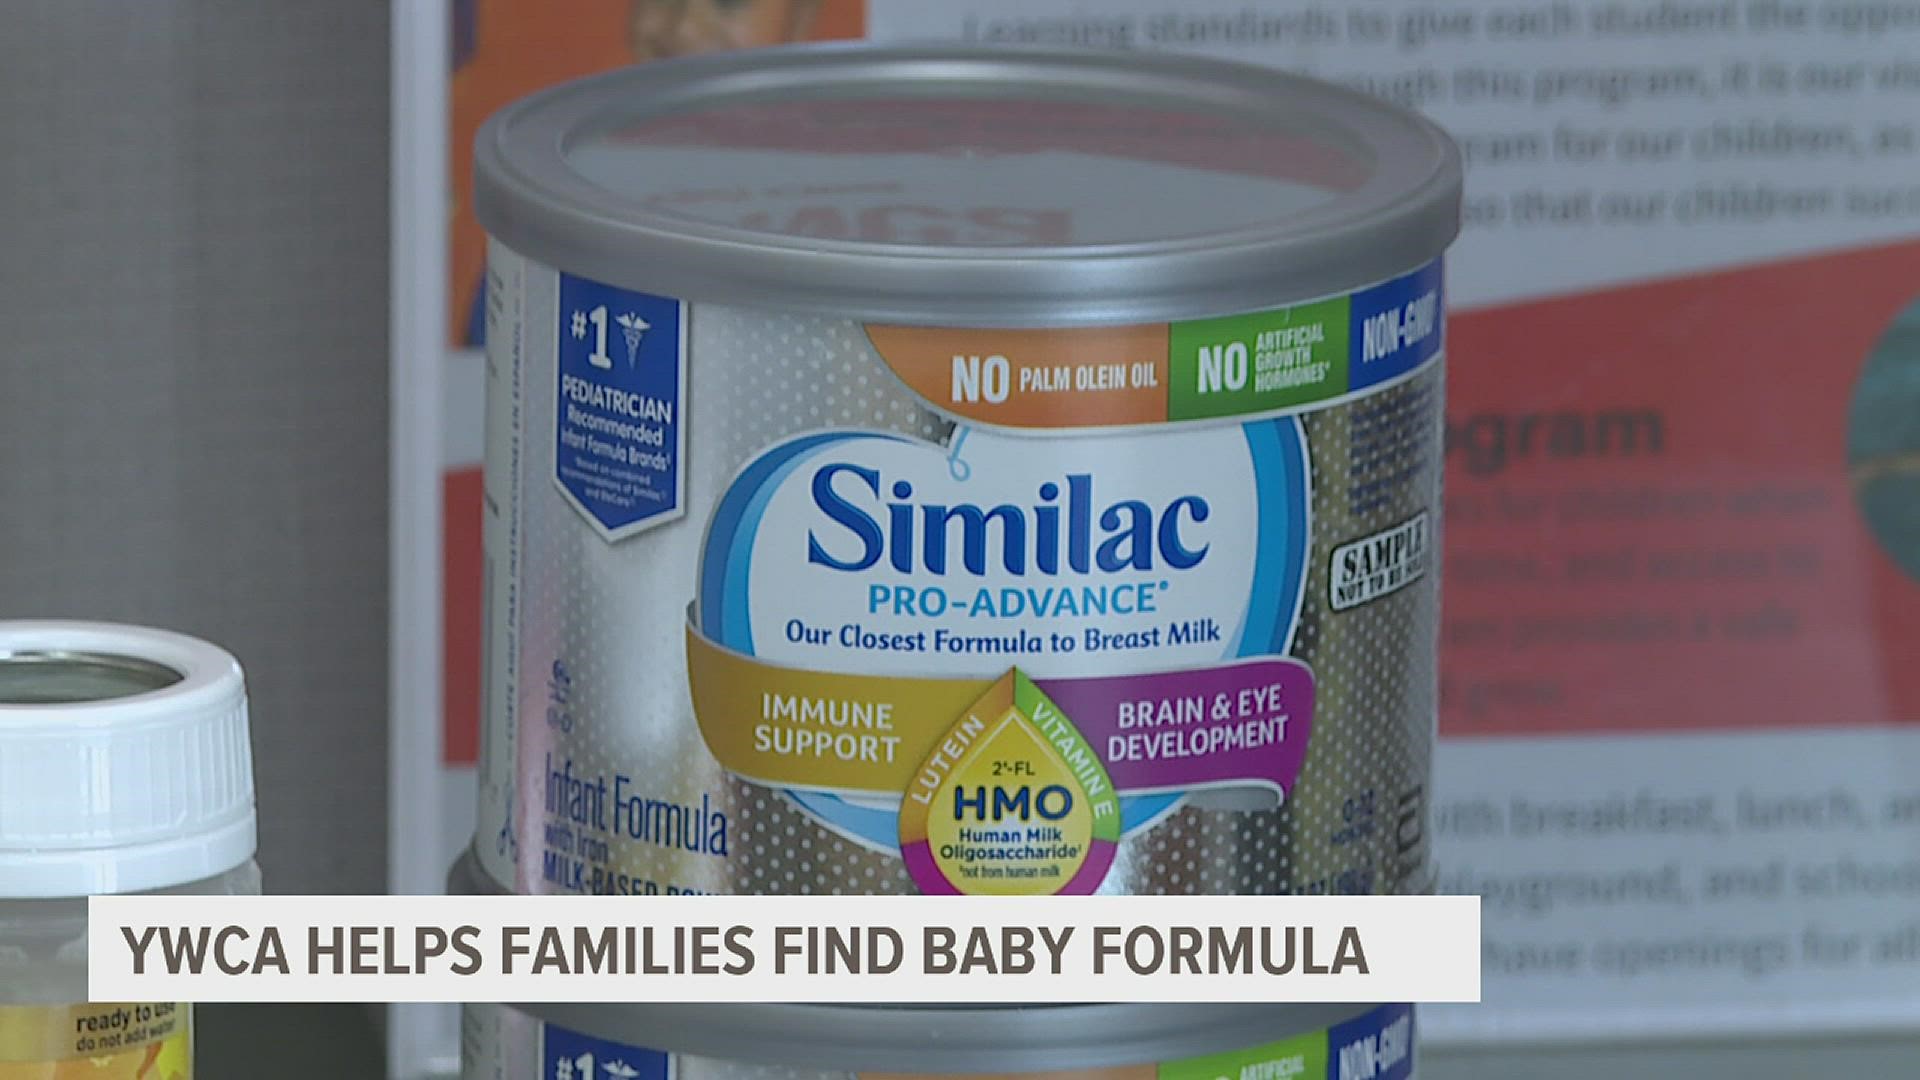 As of Tuesday afternoon, the YWCA still had a few cans of baby formula available for families at the Iowa Empowerment Center in Davenport.